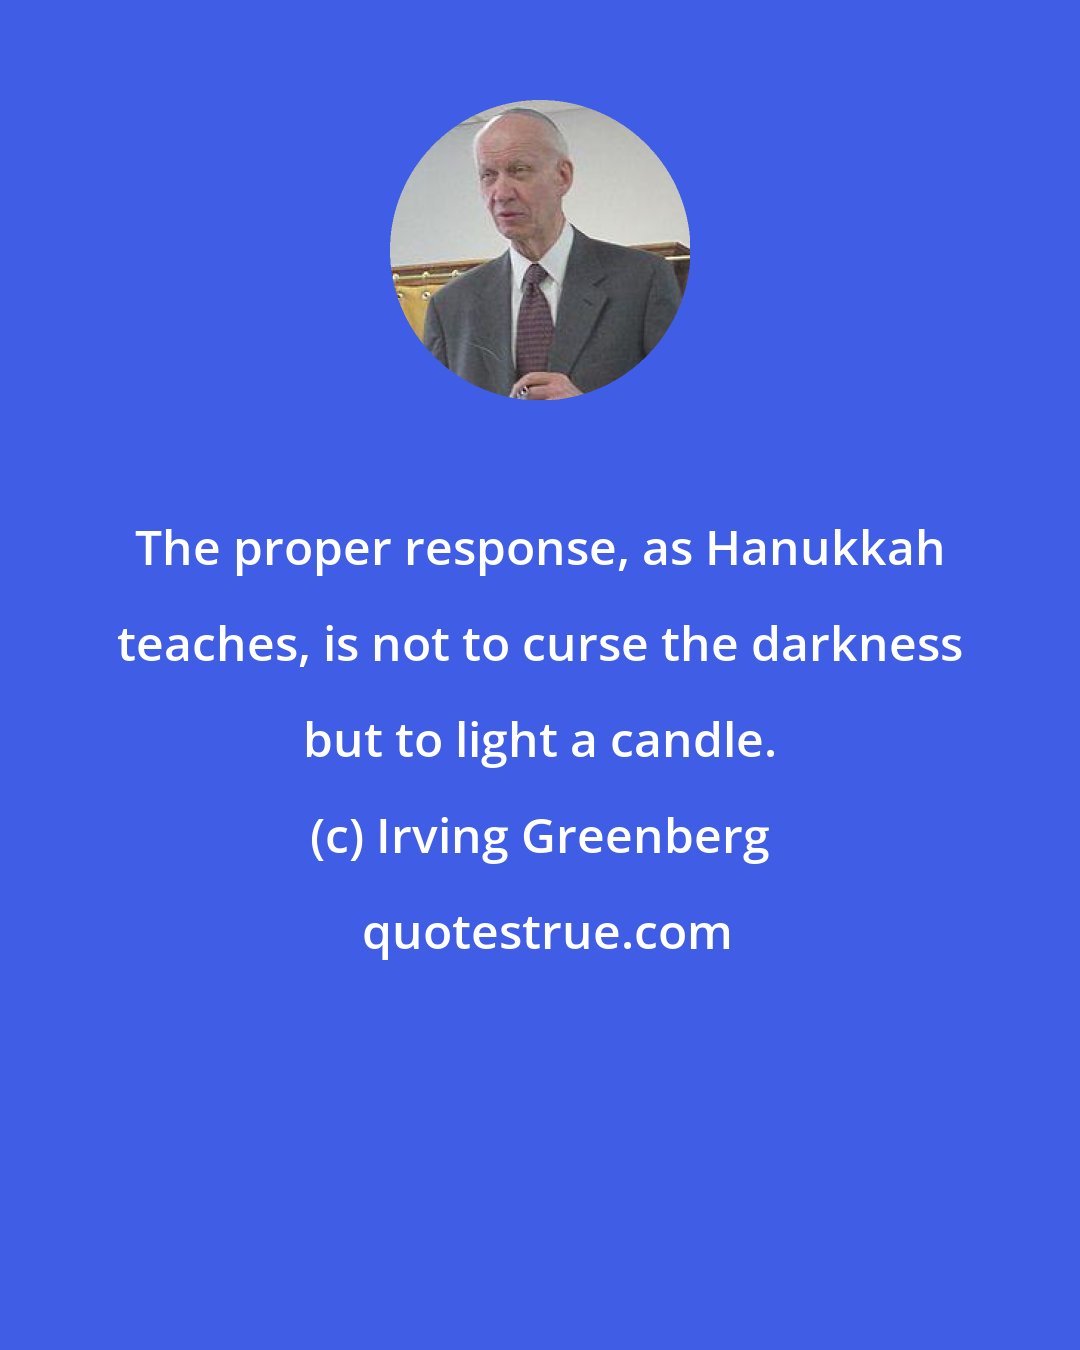 Irving Greenberg: The proper response, as Hanukkah teaches, is not to curse the darkness but to light a candle.